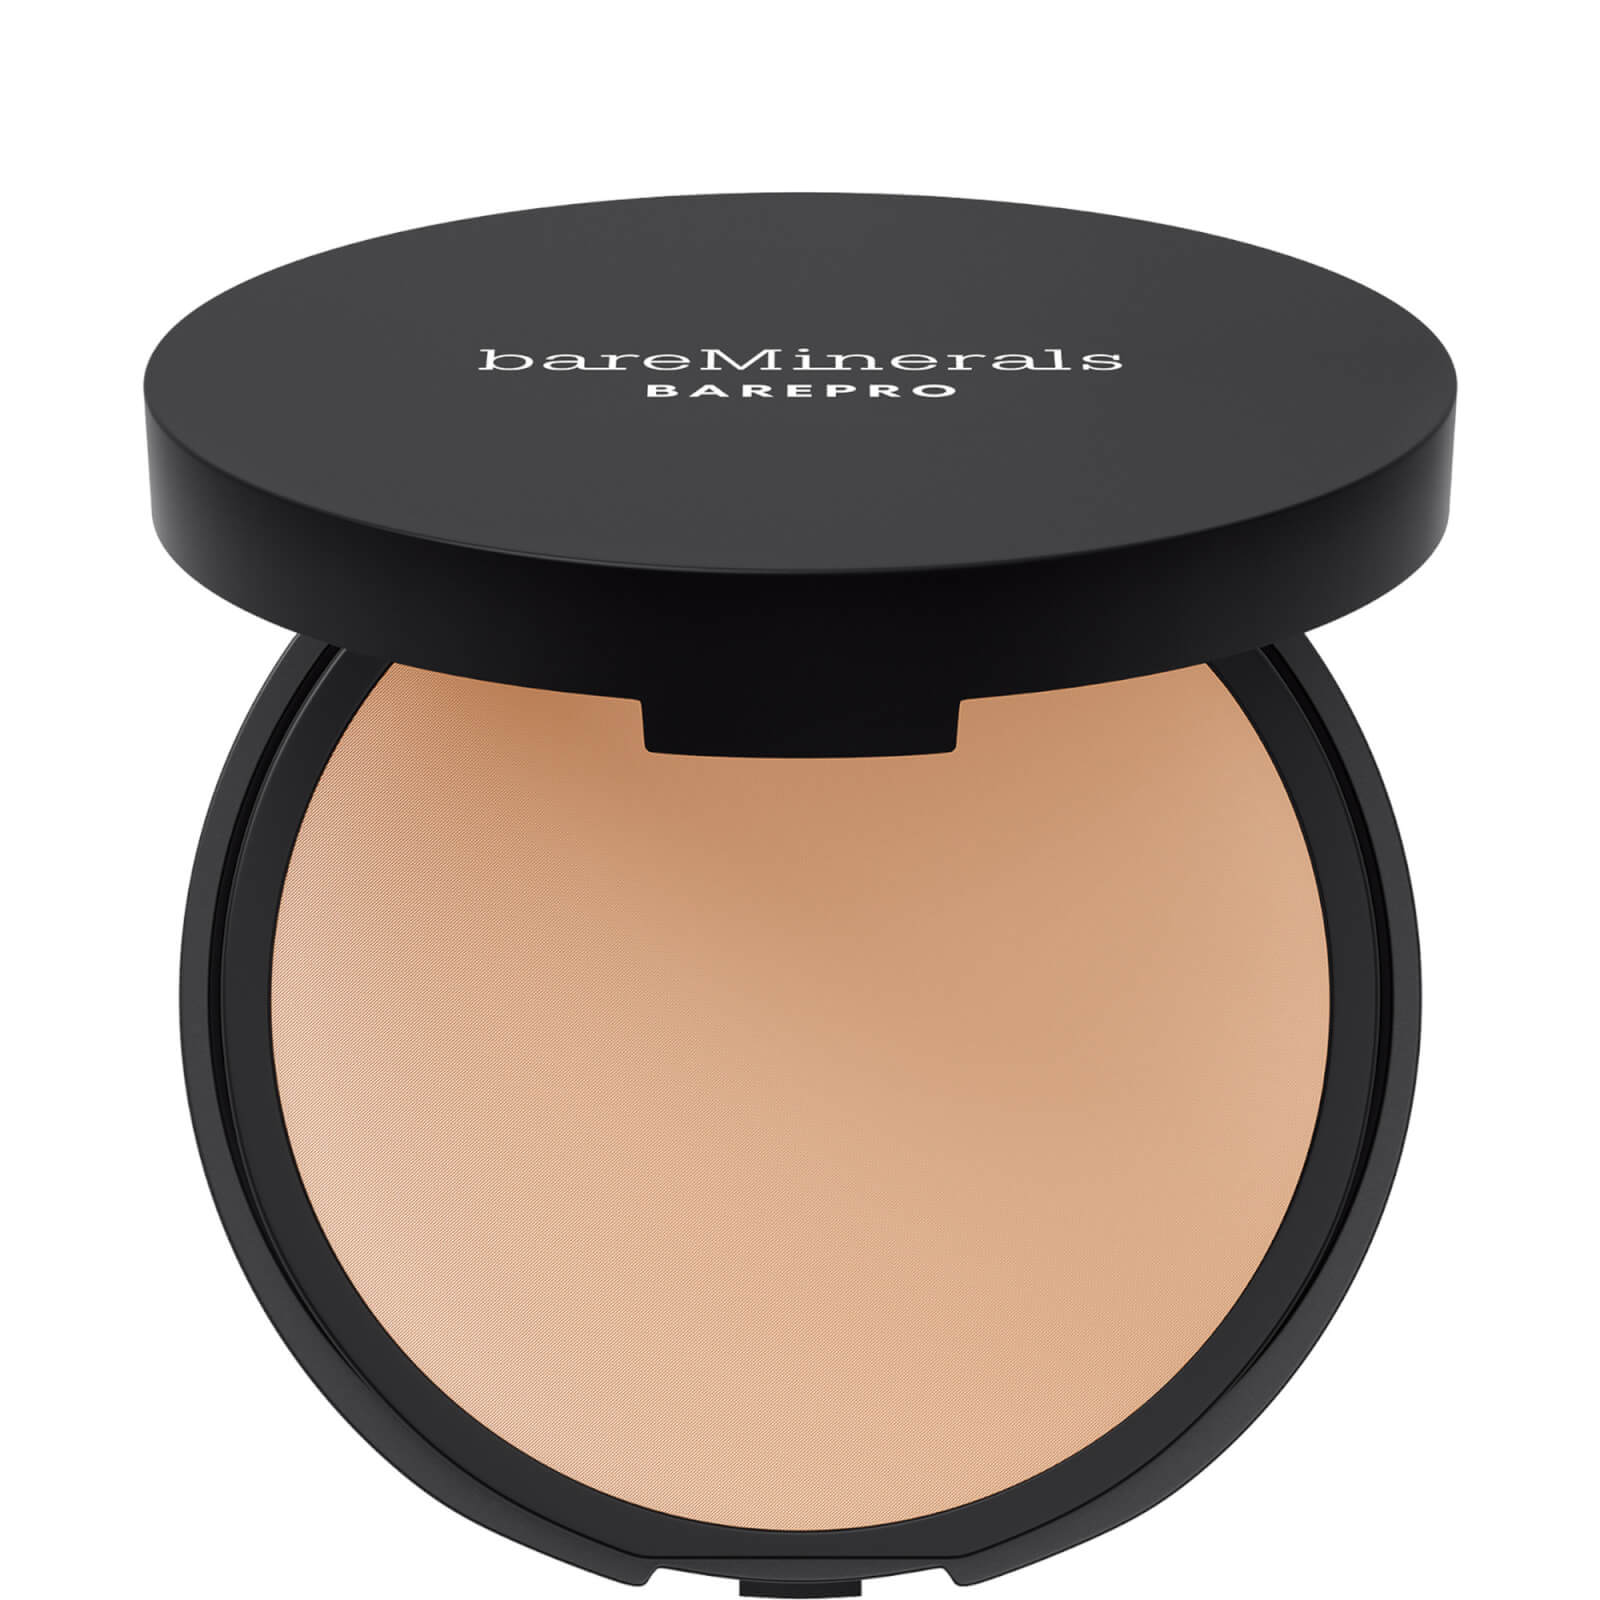 Bareminerals Barepro Pressed 16 Hour Foundation 10g (various Shades) - Light 22 Cool